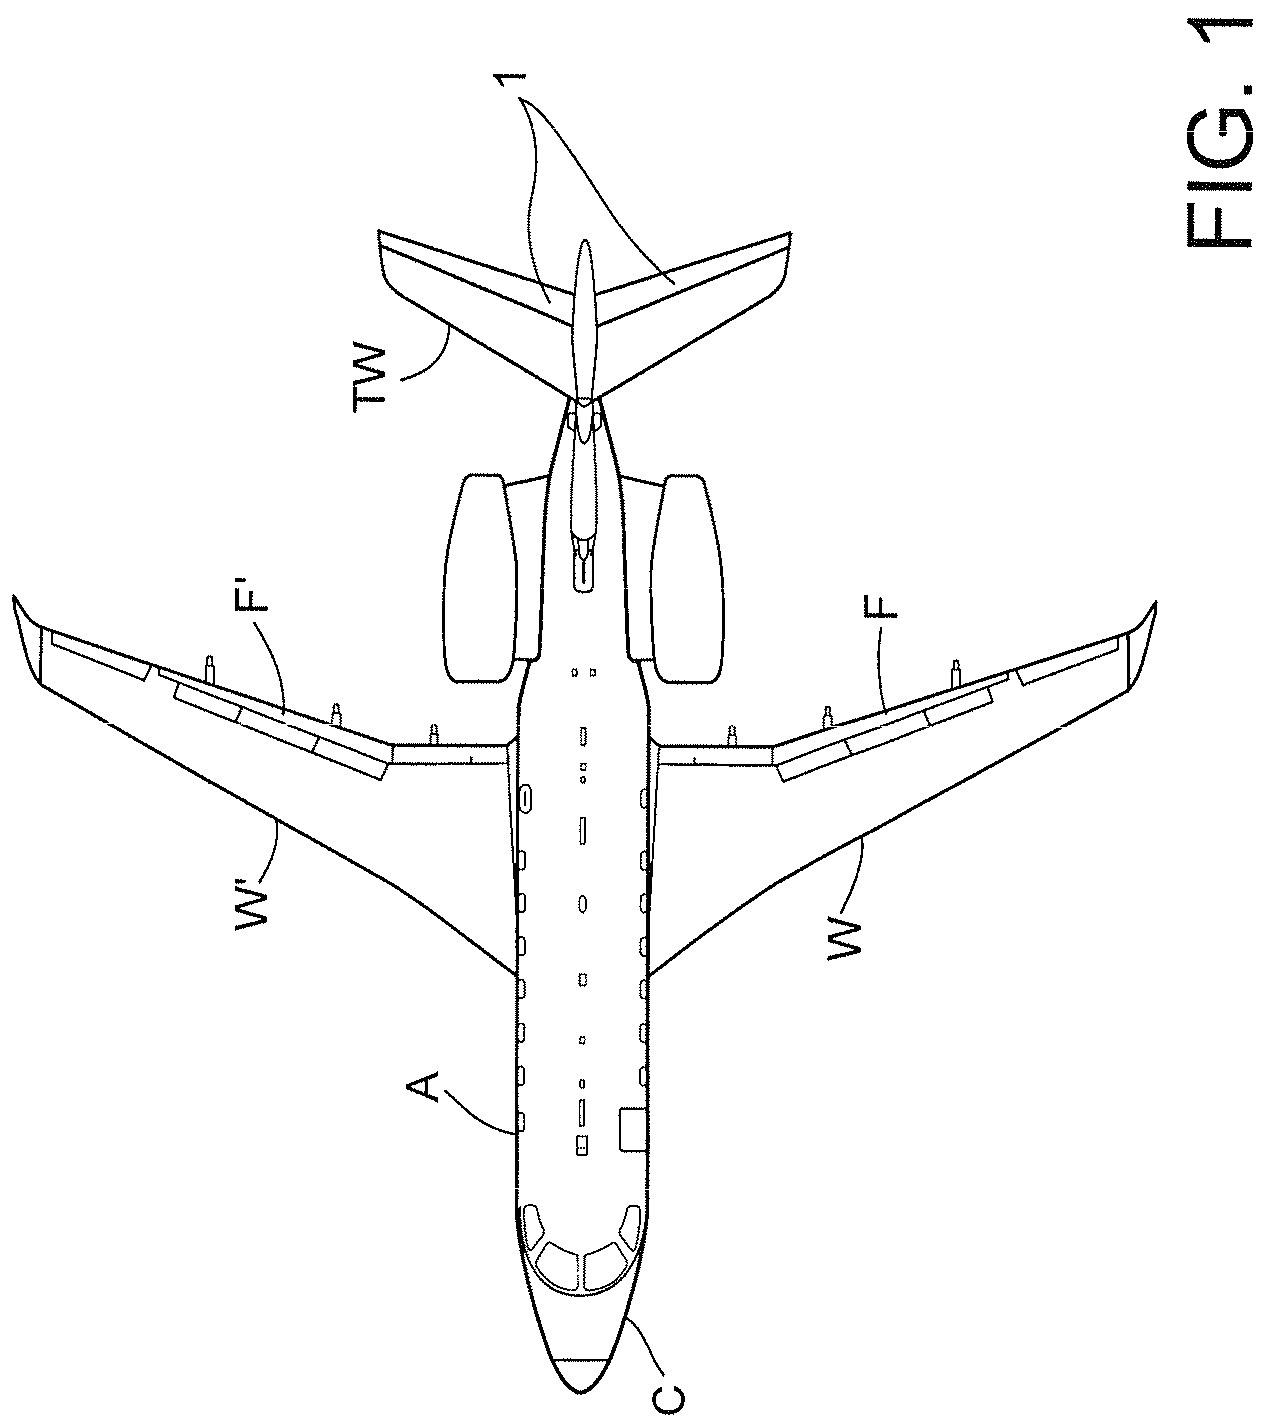 Flight control system mode and method providing aircraft speed control through the usage of momentary on-off control